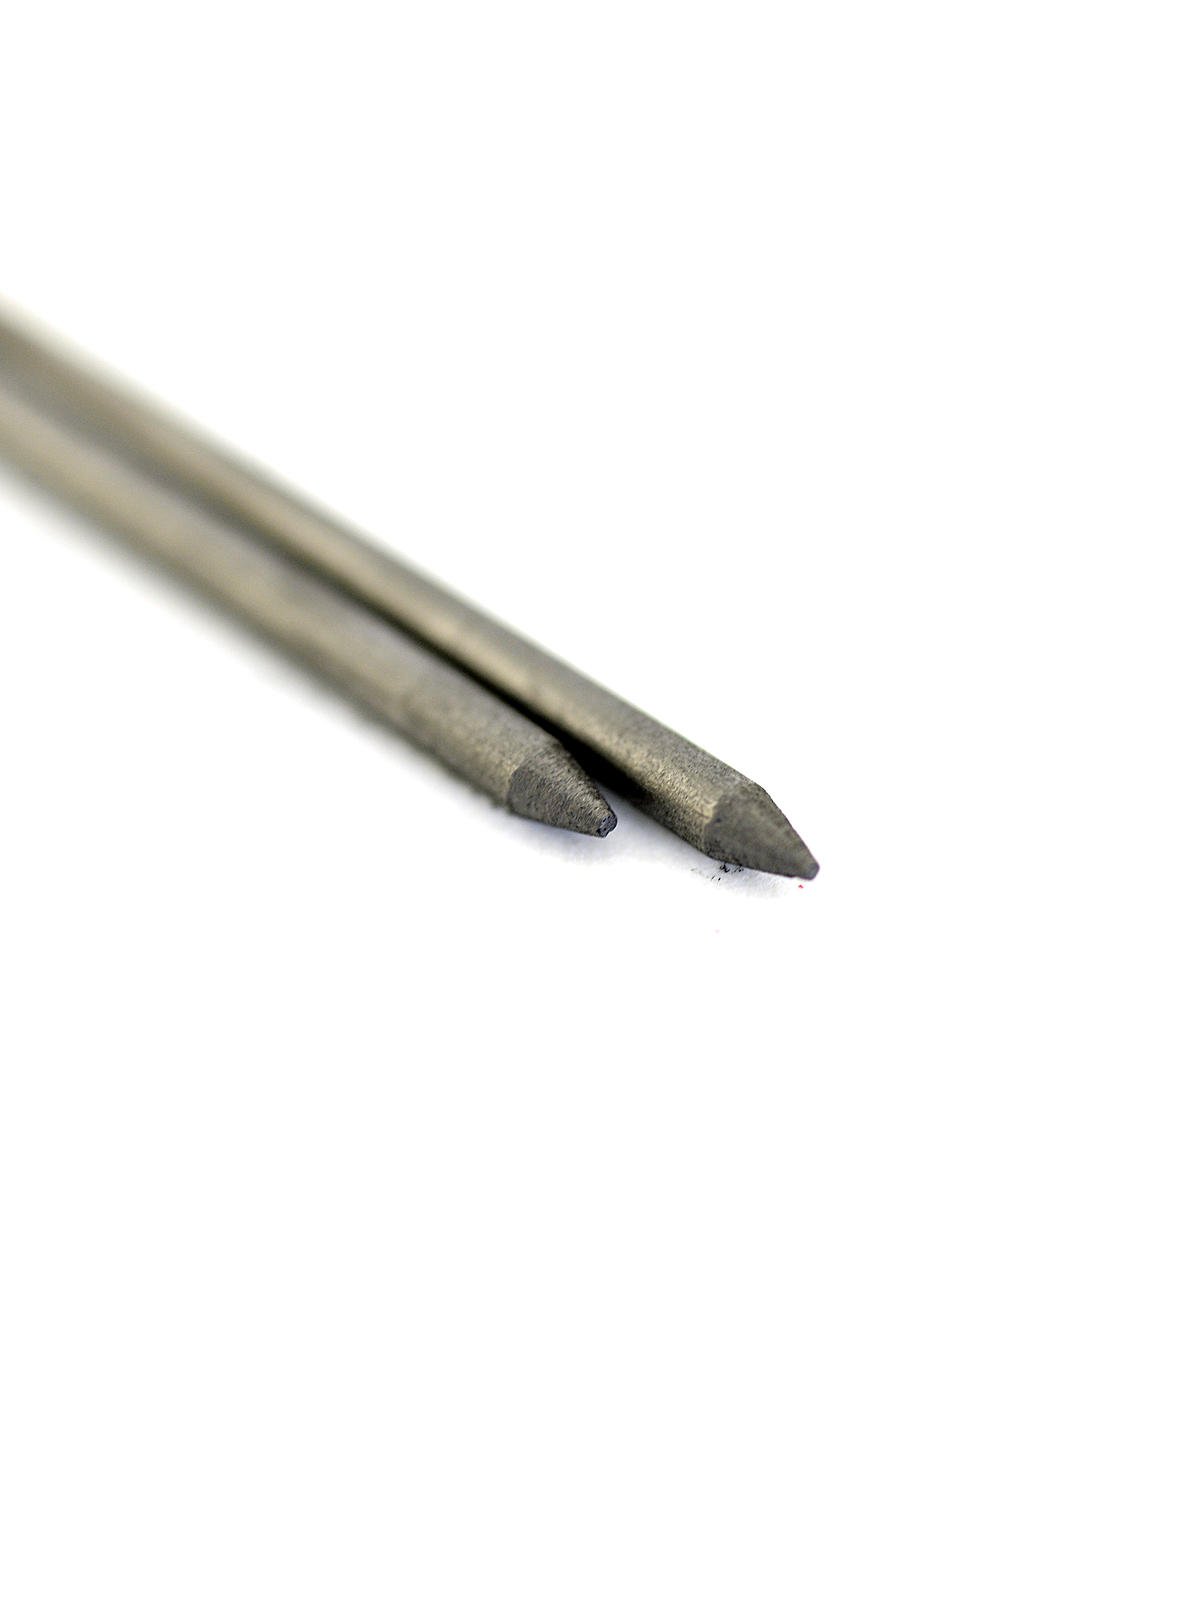 Pacific Arc - 2 mm Pencil Leads